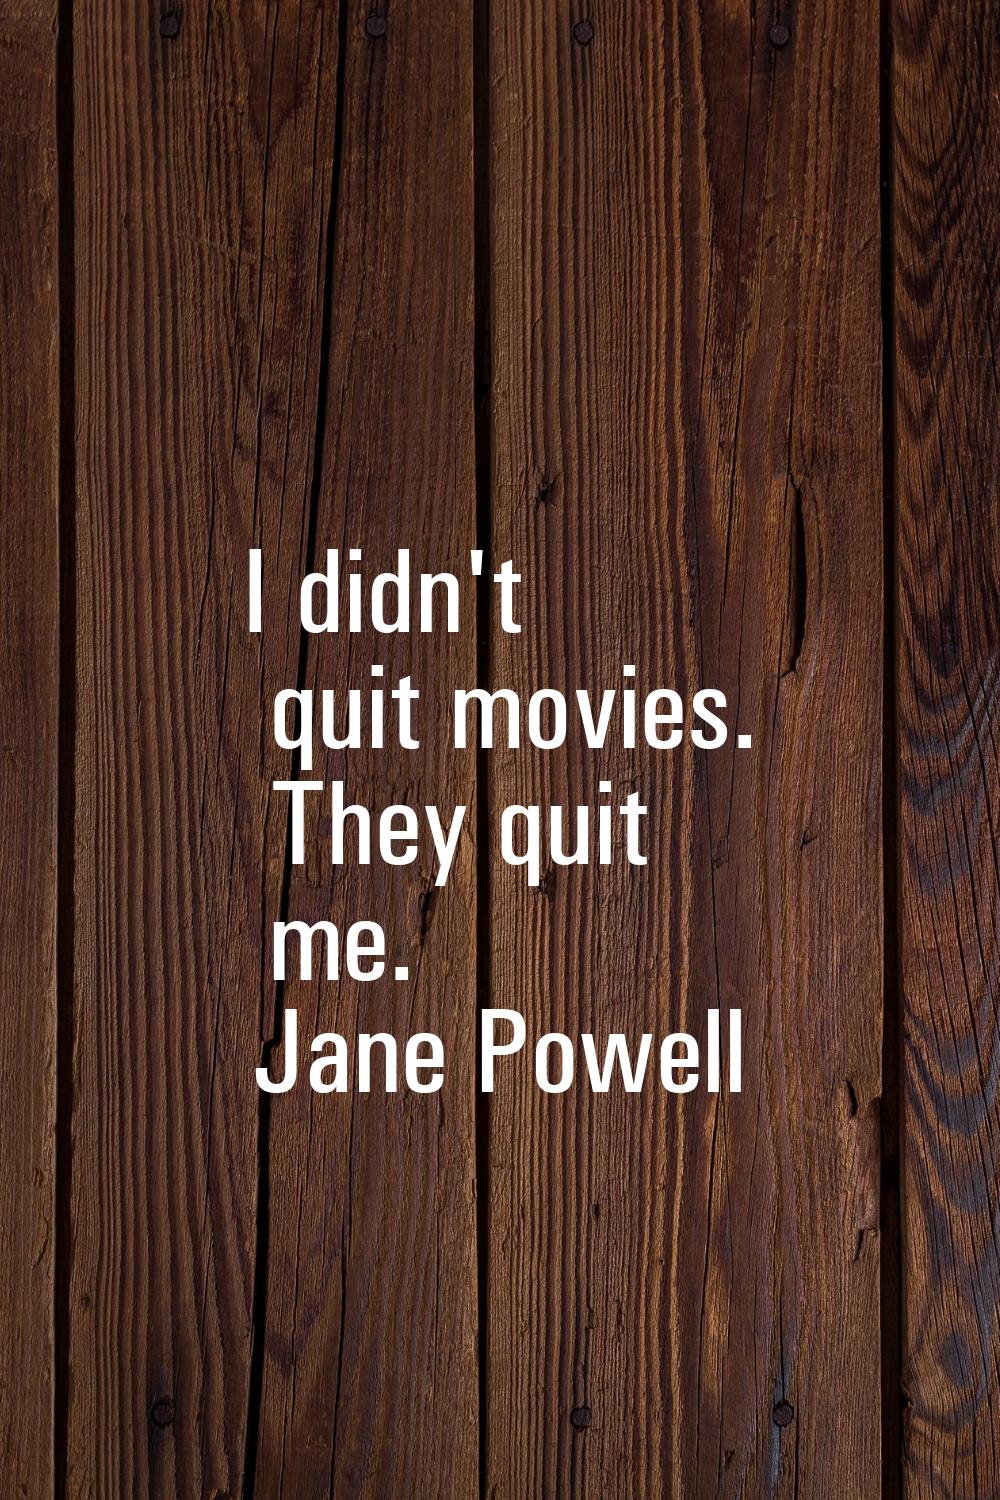 I didn't quit movies. They quit me.